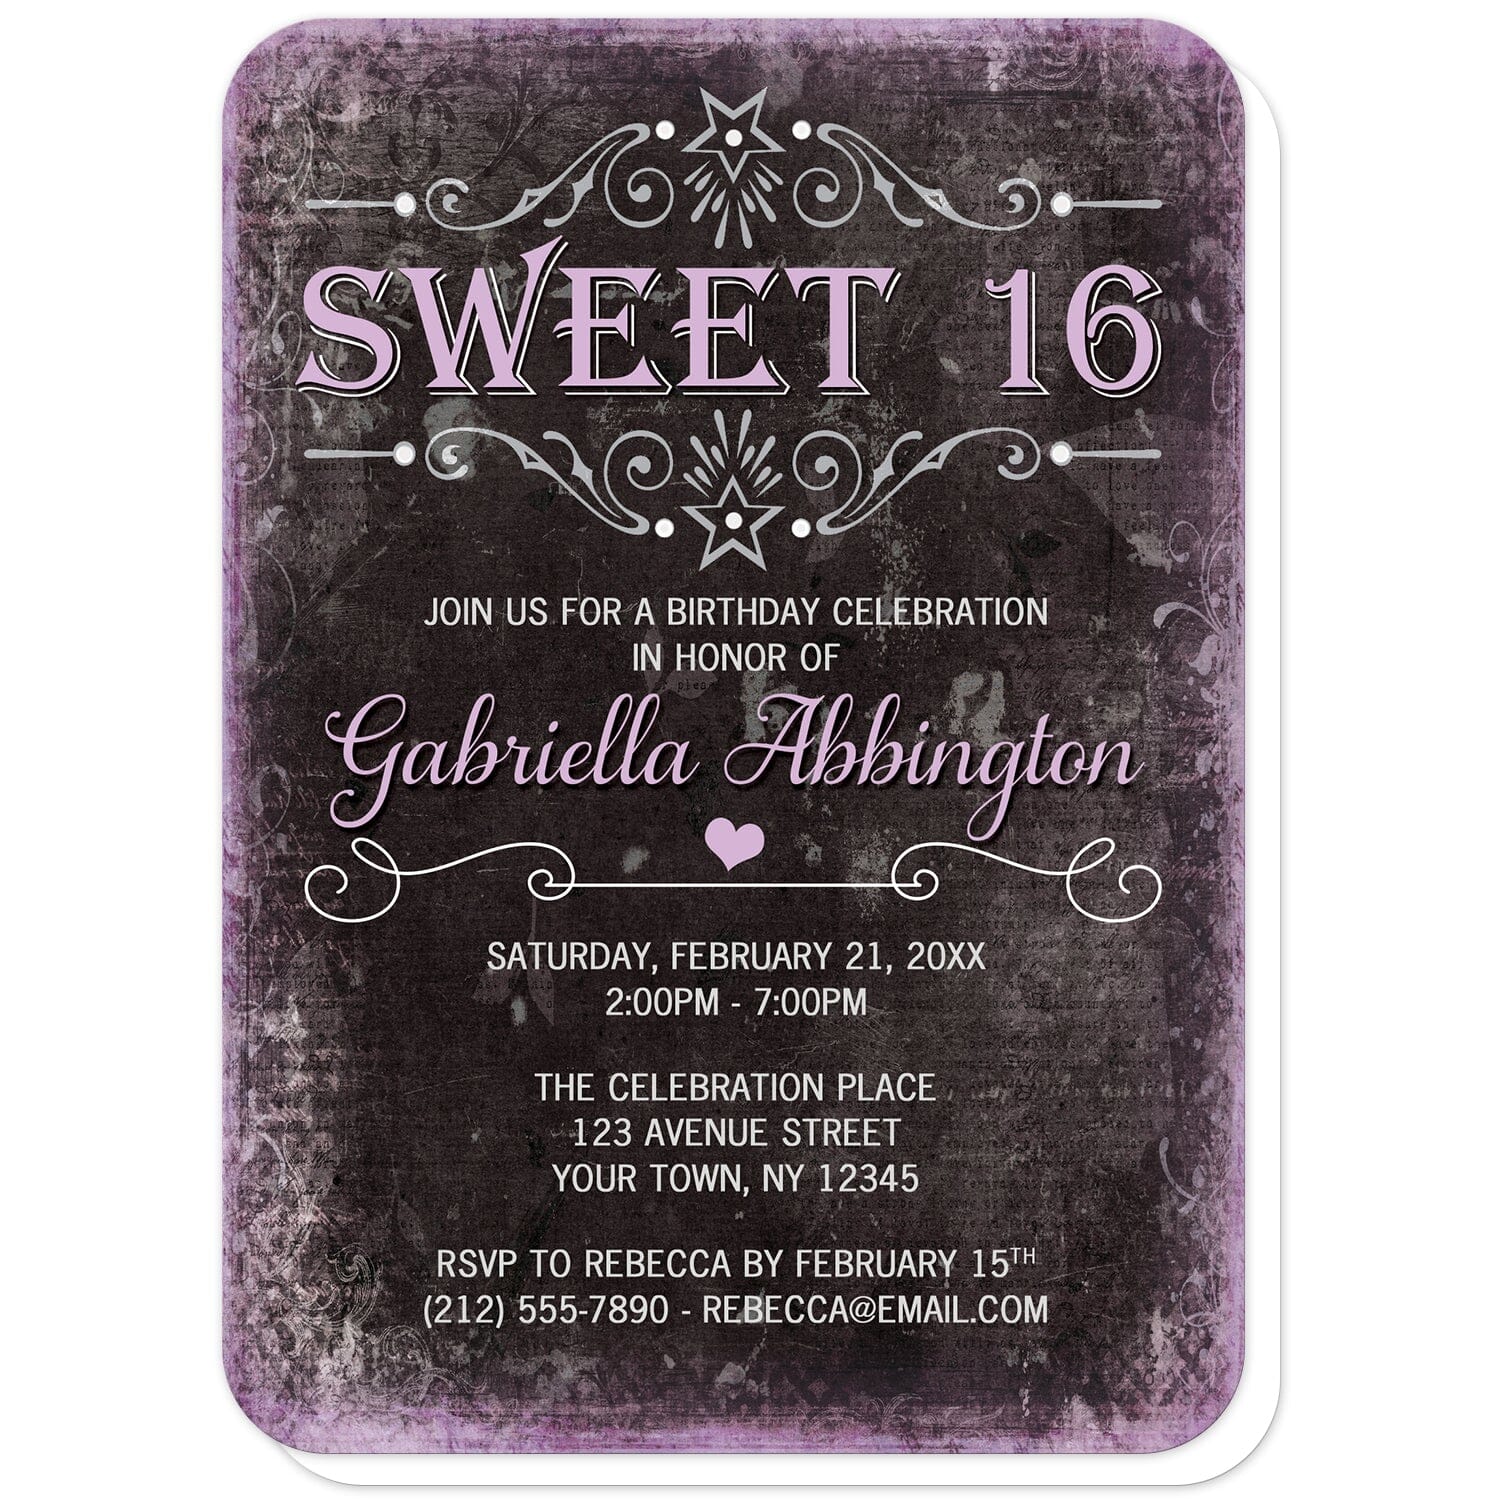 Black Grunge Purple Sweet 16 Invitations (with rounded corners) at Artistically Invited. Alternative-style black grunge purple sweet 16 invitations with a stylized black background and distressed purple-colored edges. Your personalized sweet sixteen birthday party details are custom printed in white and light purple fonts using modern and girly typography with flourish line borders between some of the wording. 